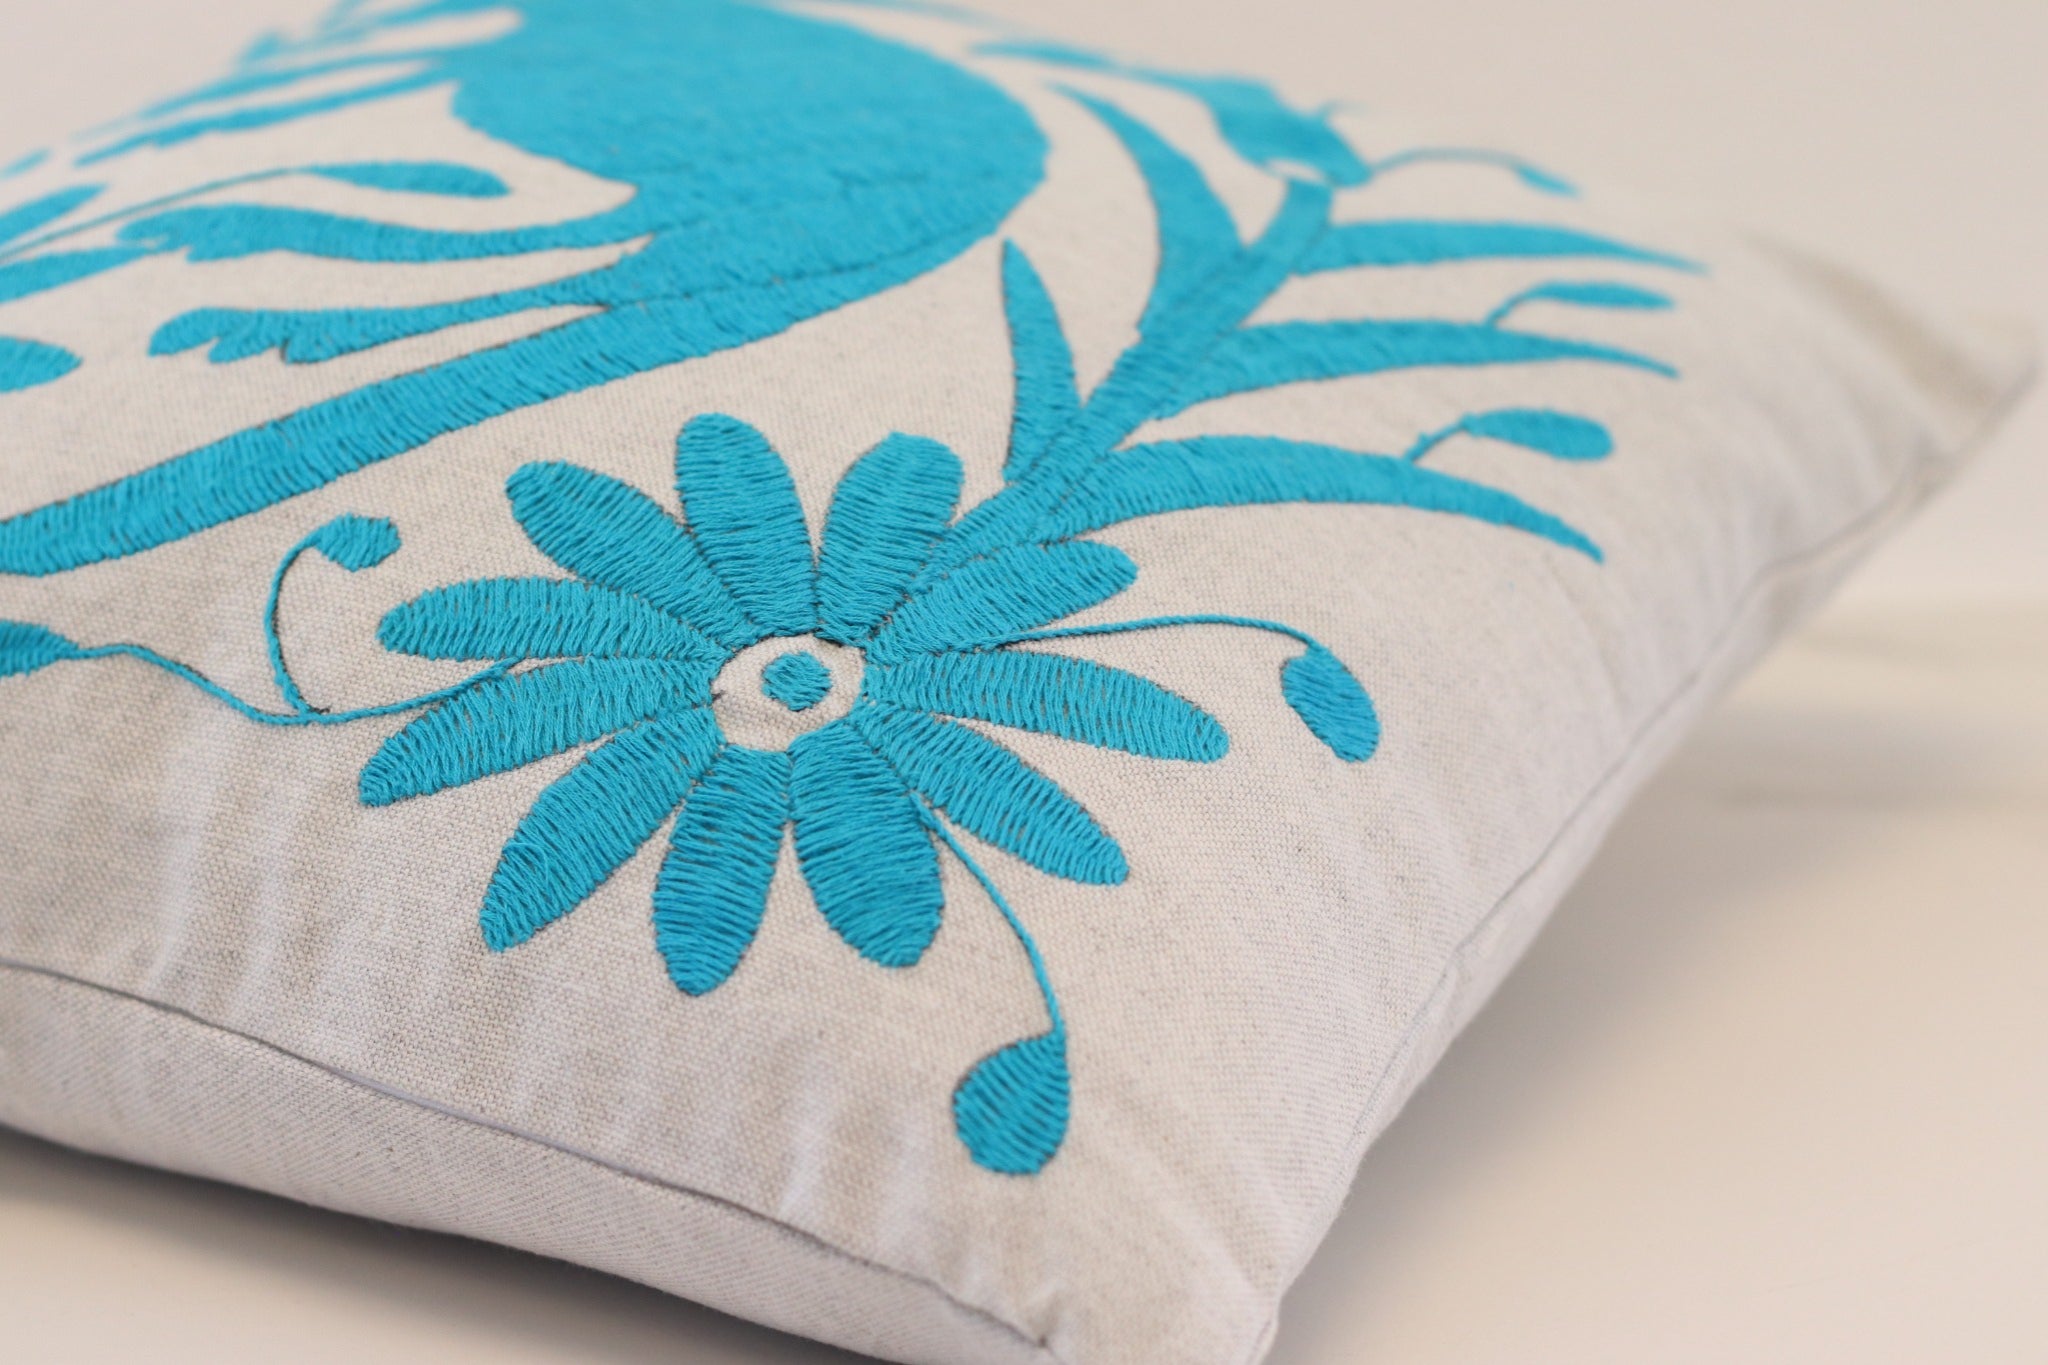  Aqua and Light Gray Square Otomi Tenango Pillow Cover with Hand Embroidered Birds, Flowers, and Animals in Vibrant Colors. Handmade in Mexico. Ships from the USA. Buy now at www.felipeandgrace.com.